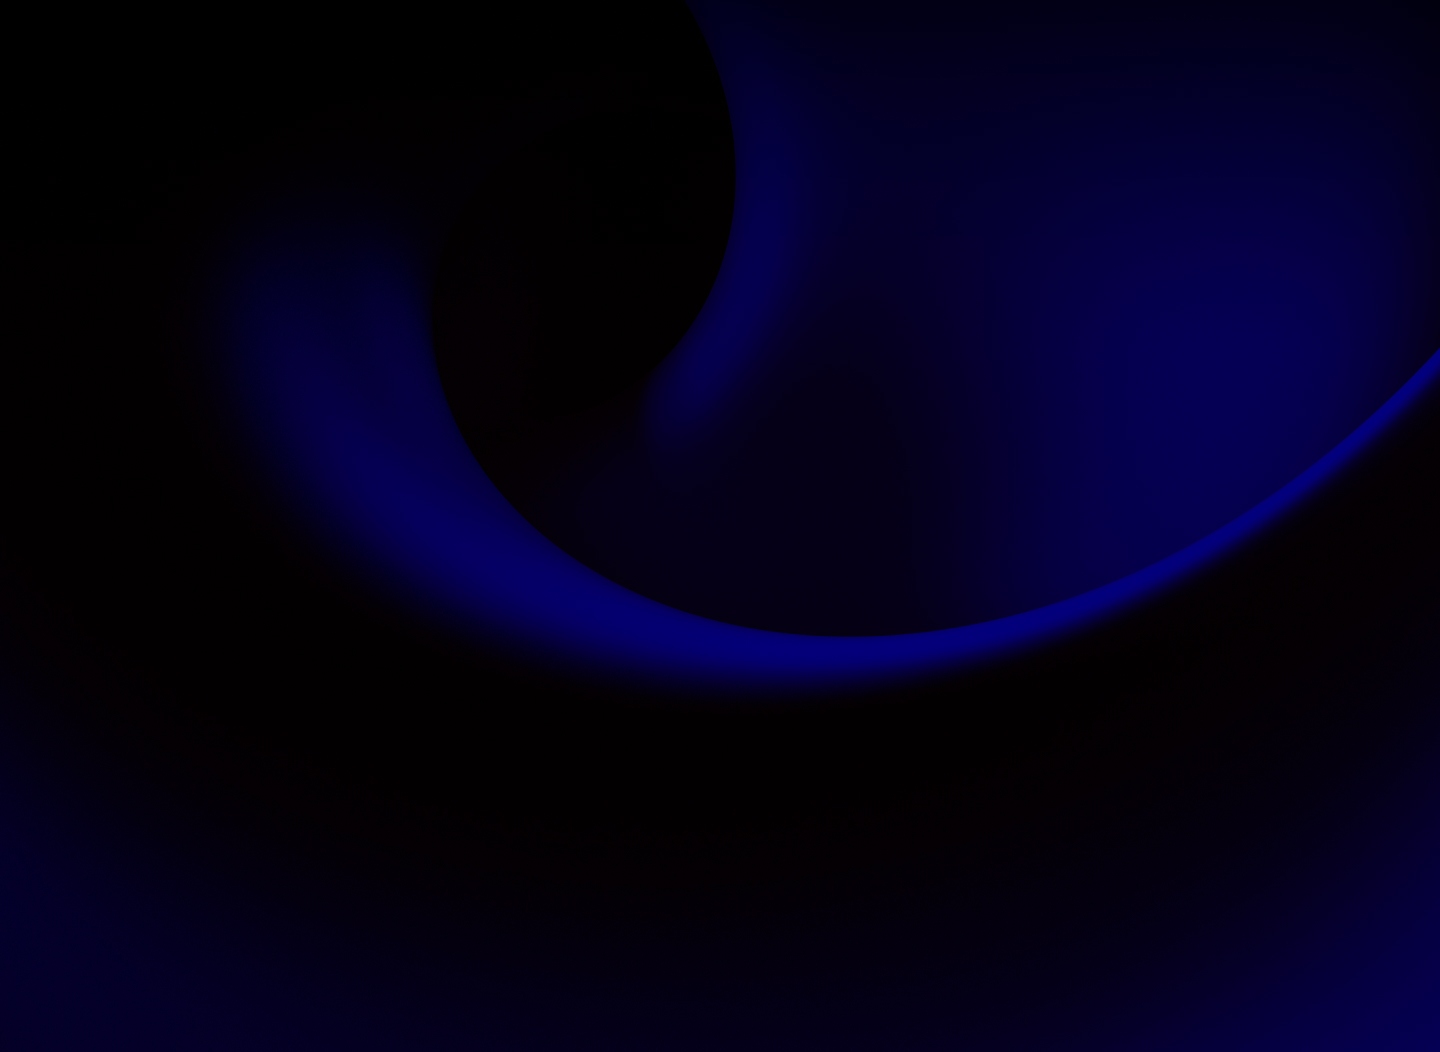 hero background black with blue shapes - centralized creative feedback-1